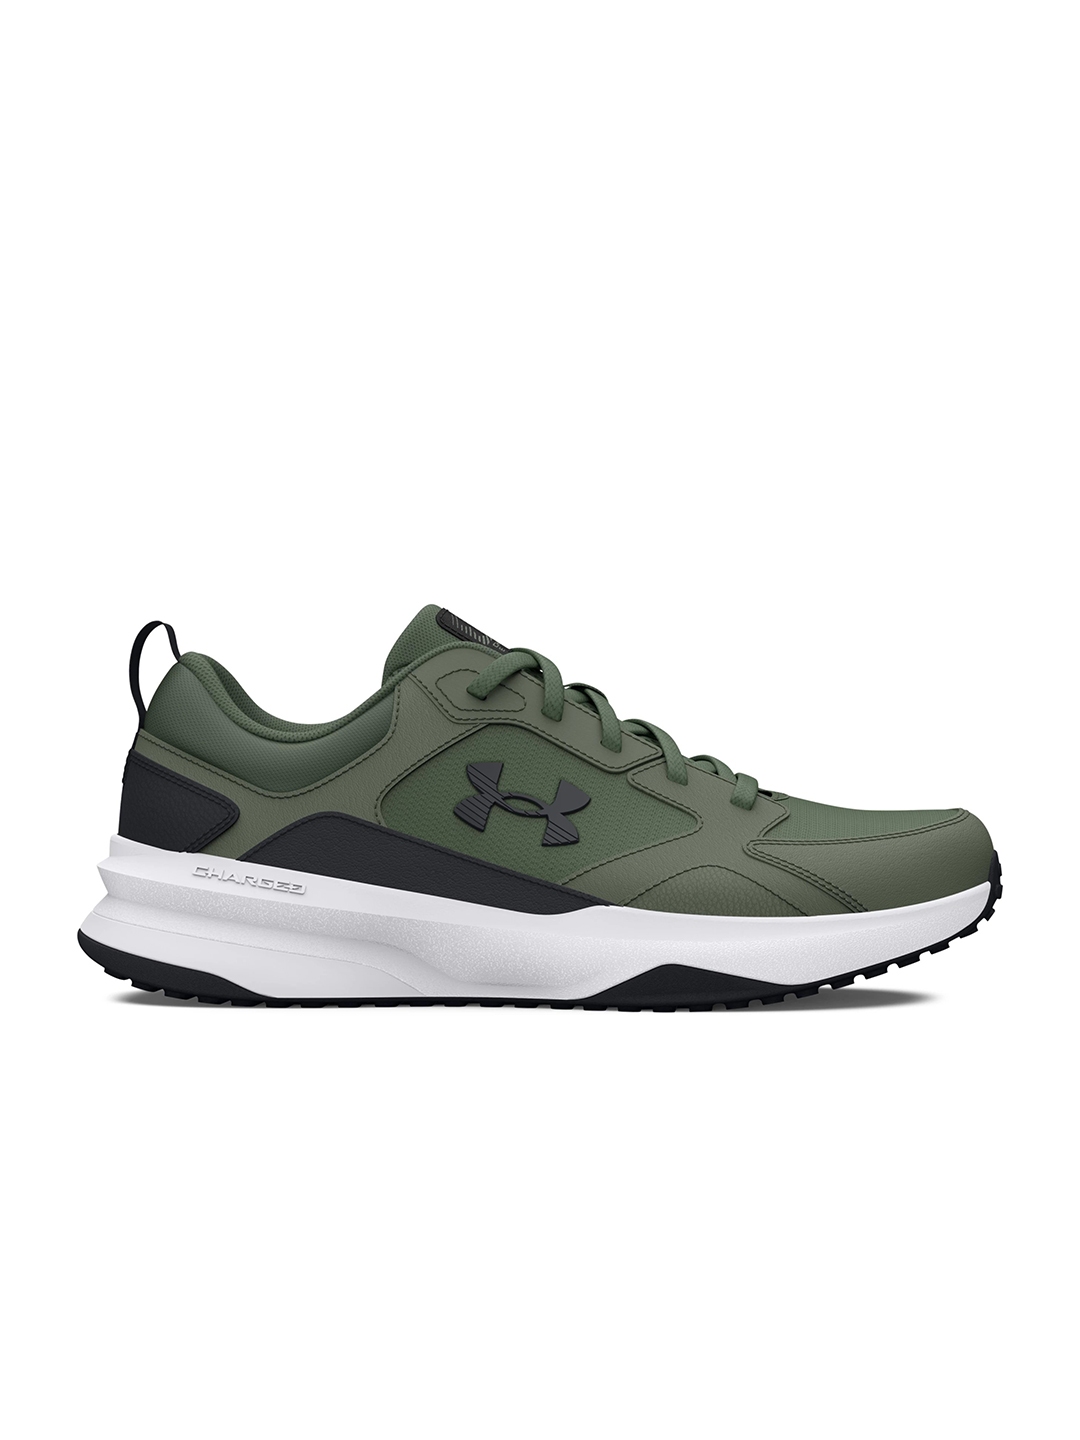 Under Armour Men's Charged Focus Cross Trainer